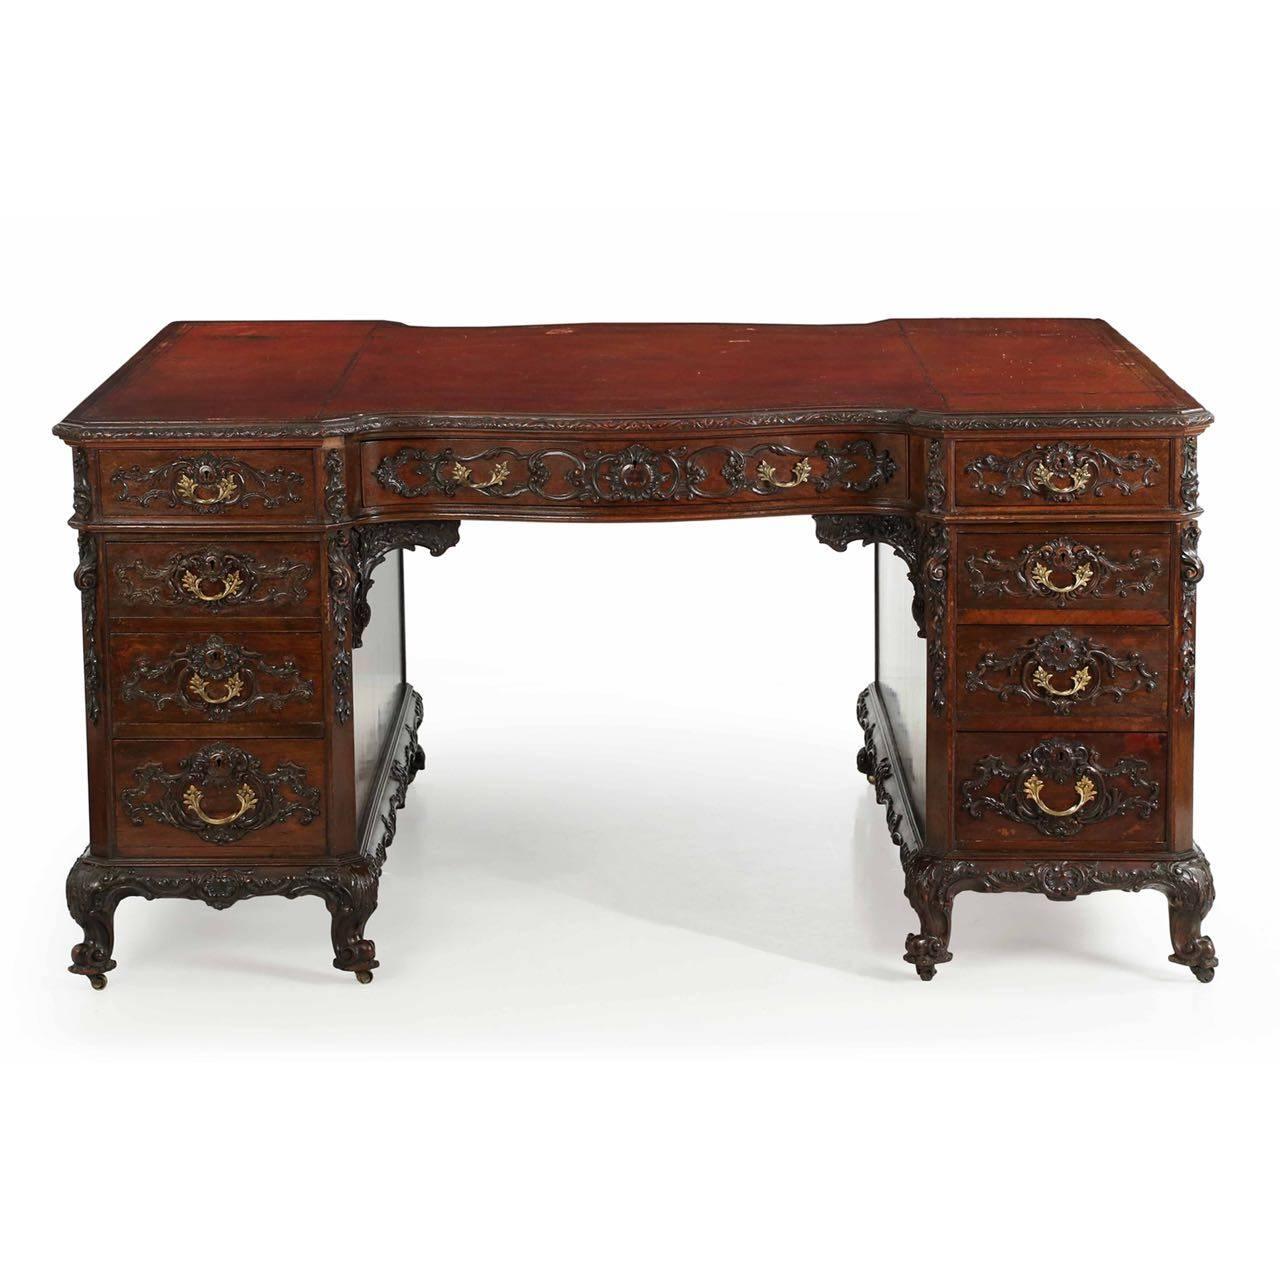 This inordinately fine partner’s desk was crafted by the firm of Bertram & Sons in London in the last quarter of the 19th century. William Bertram established his firm in 1830 and began dealing at 100 Dean St. in 1839. The central drawer is marked